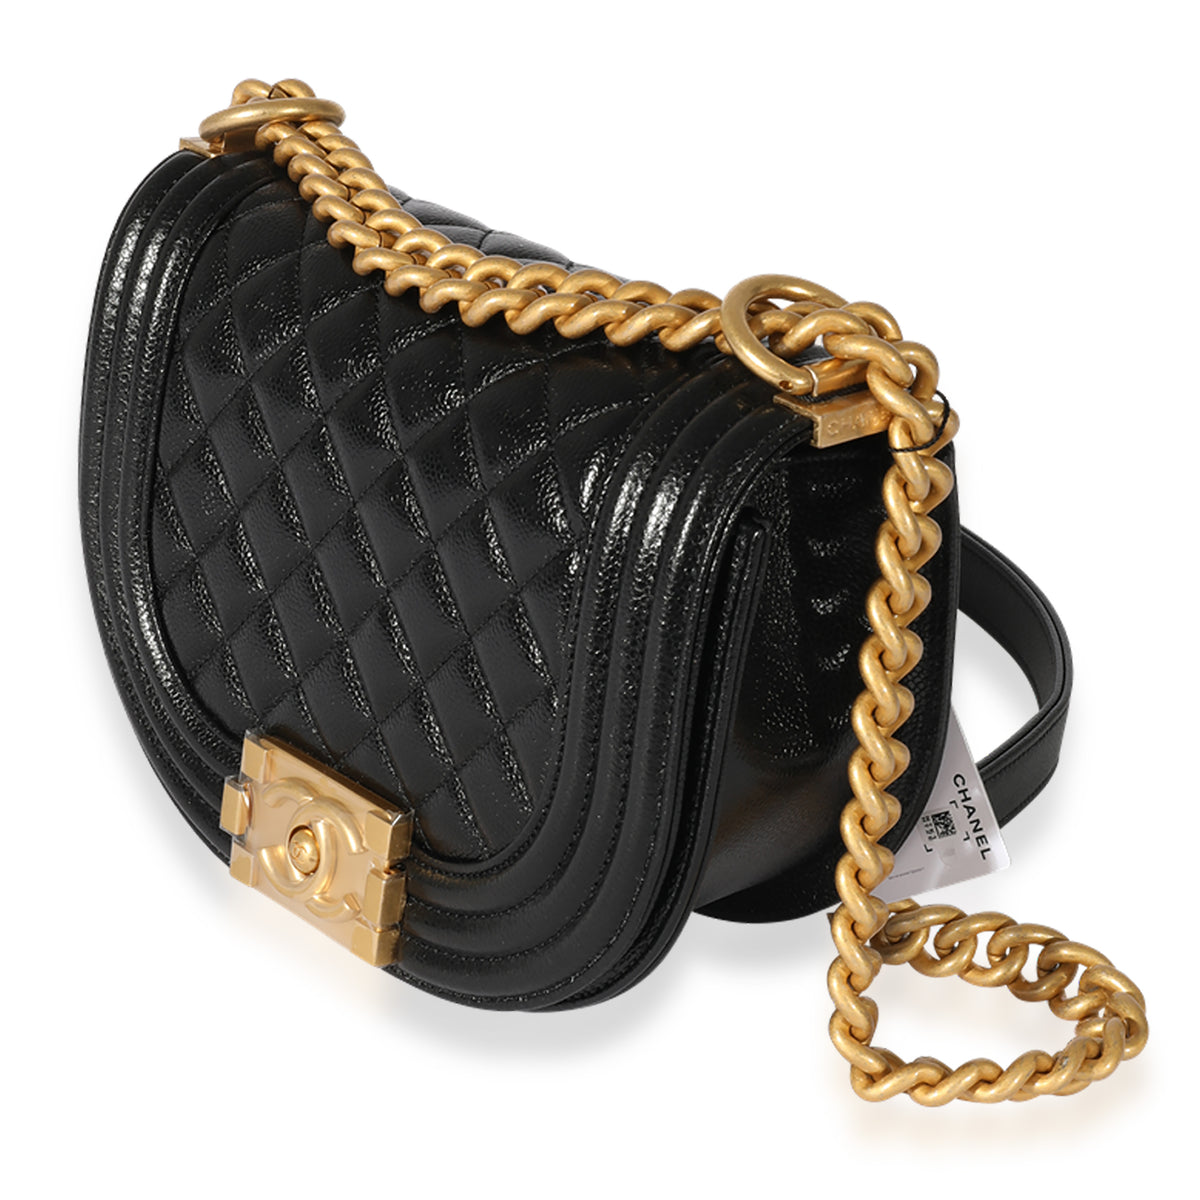 Embrace The Curves On Chanel's New #BoyChanel Messenger - BAGAHOLICBOY